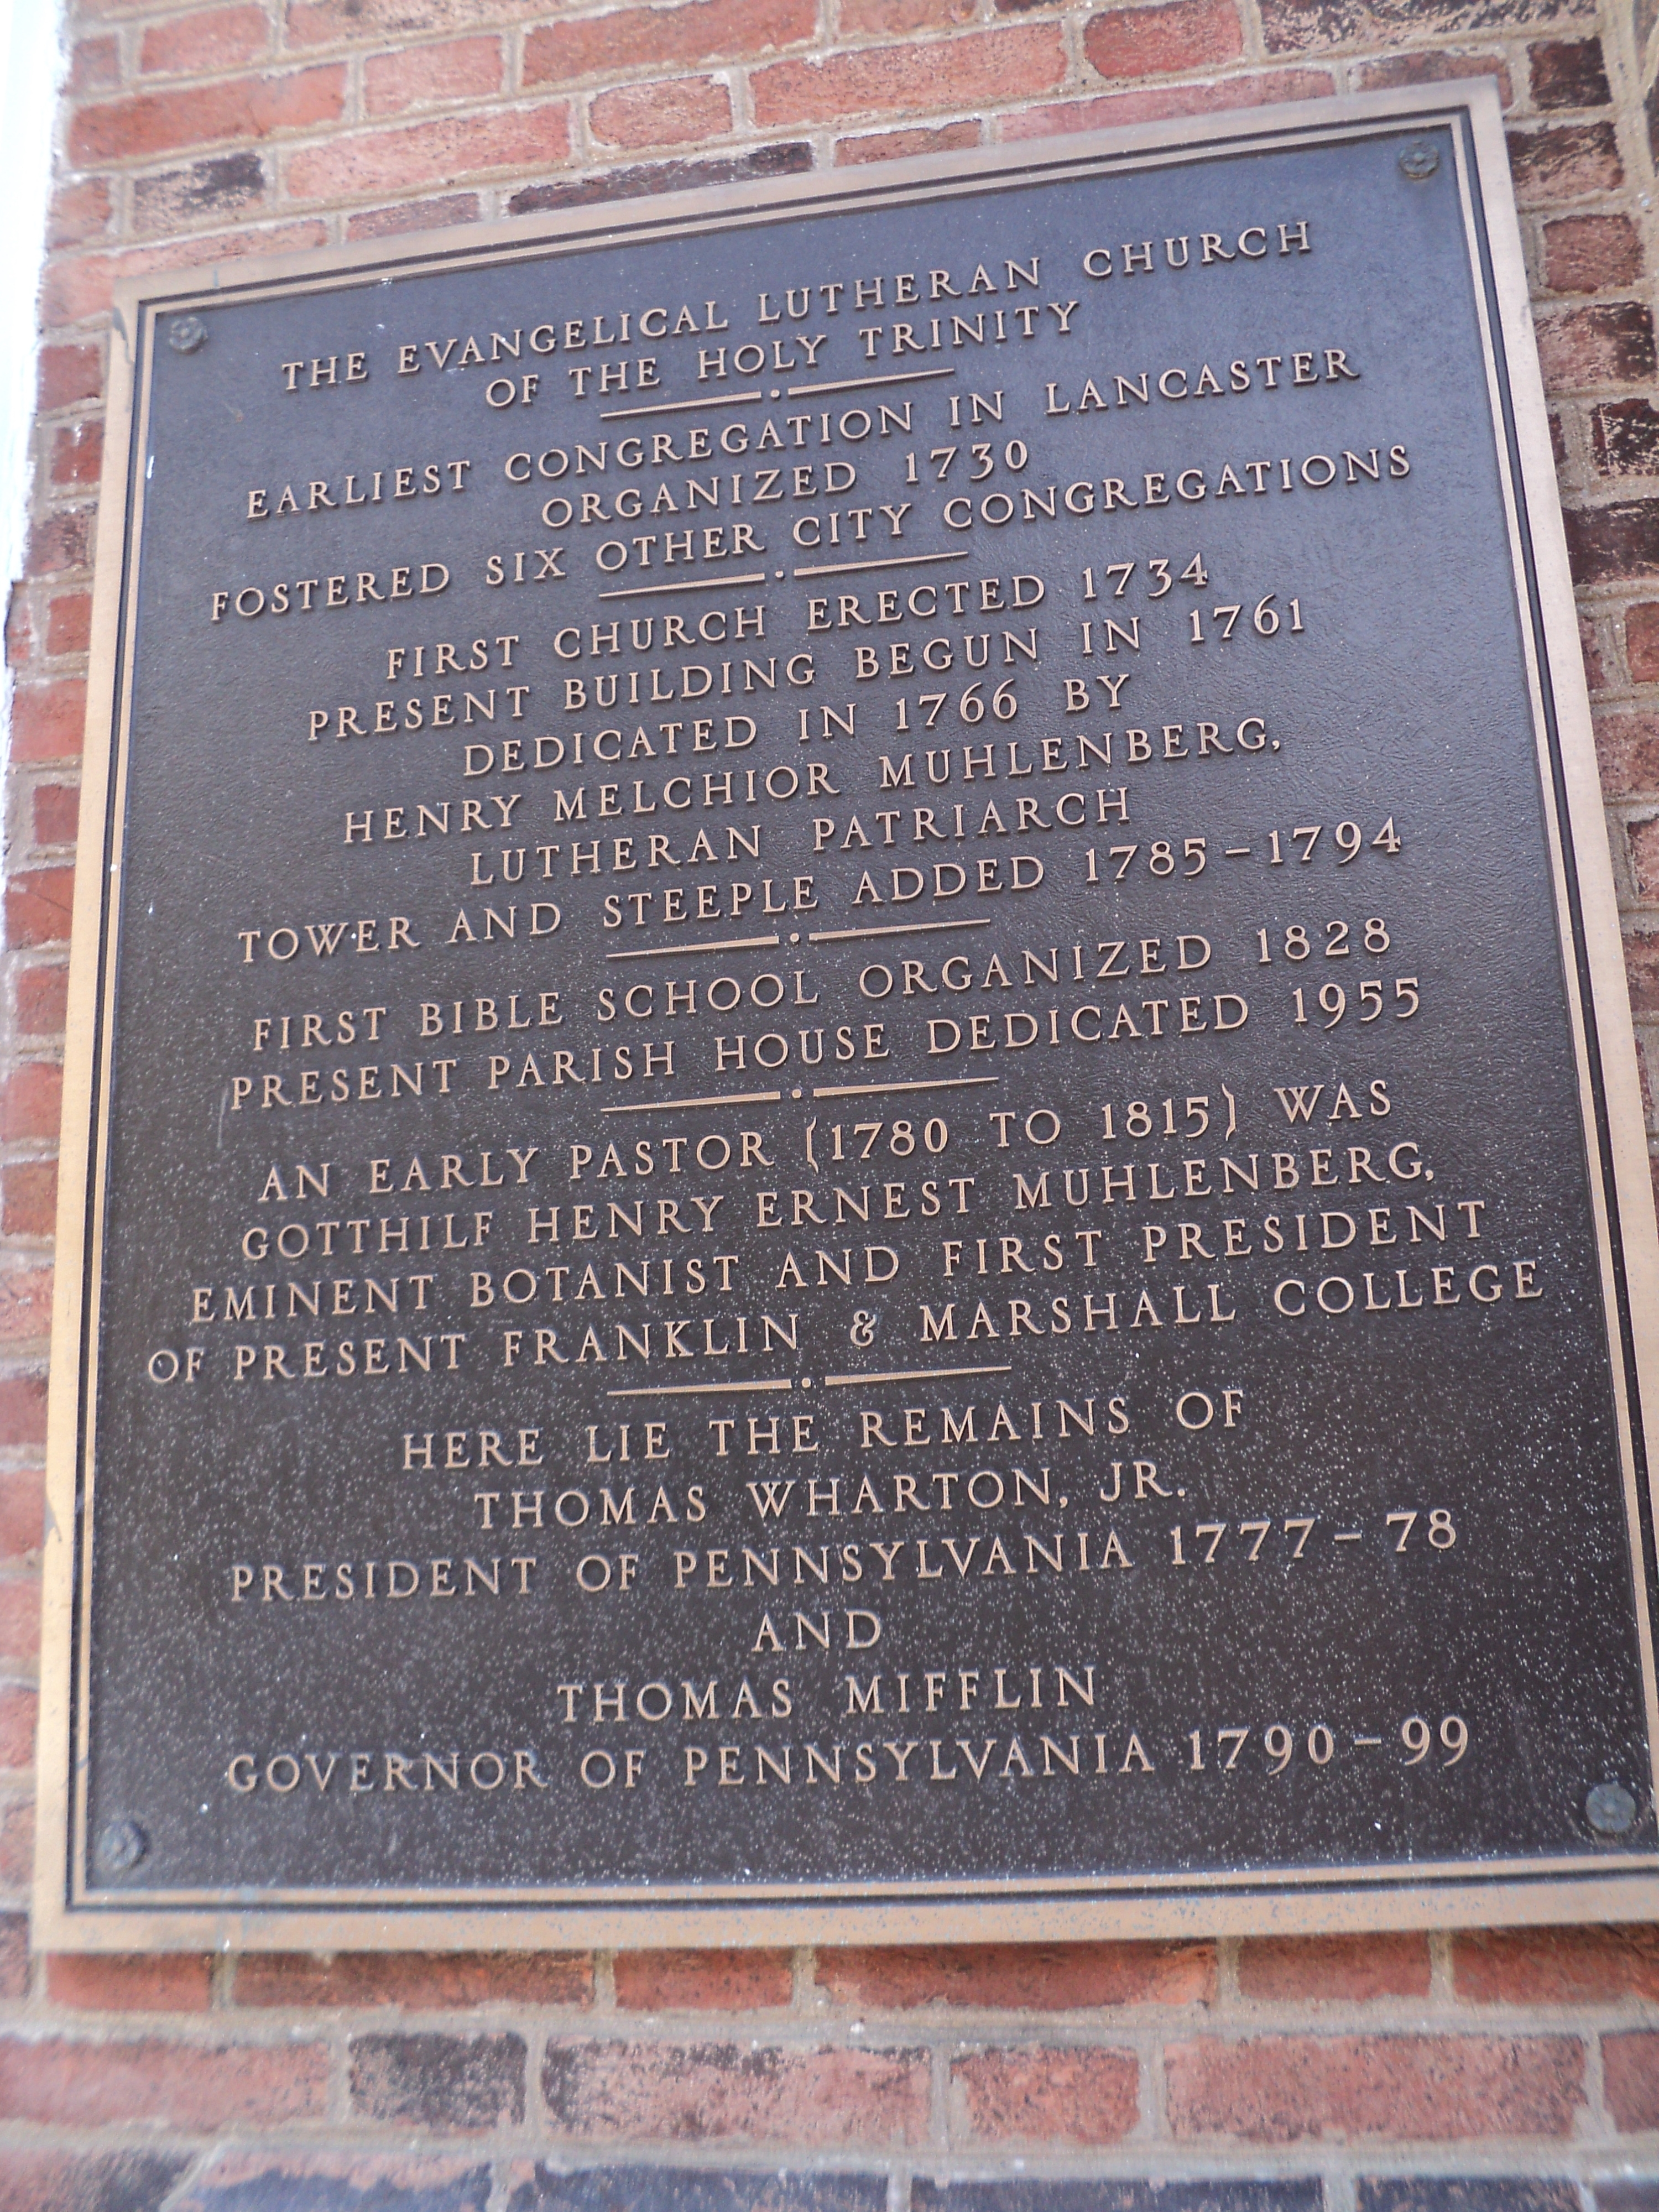 The Evangelic Lutheran Church of the Holy Trinity Marker